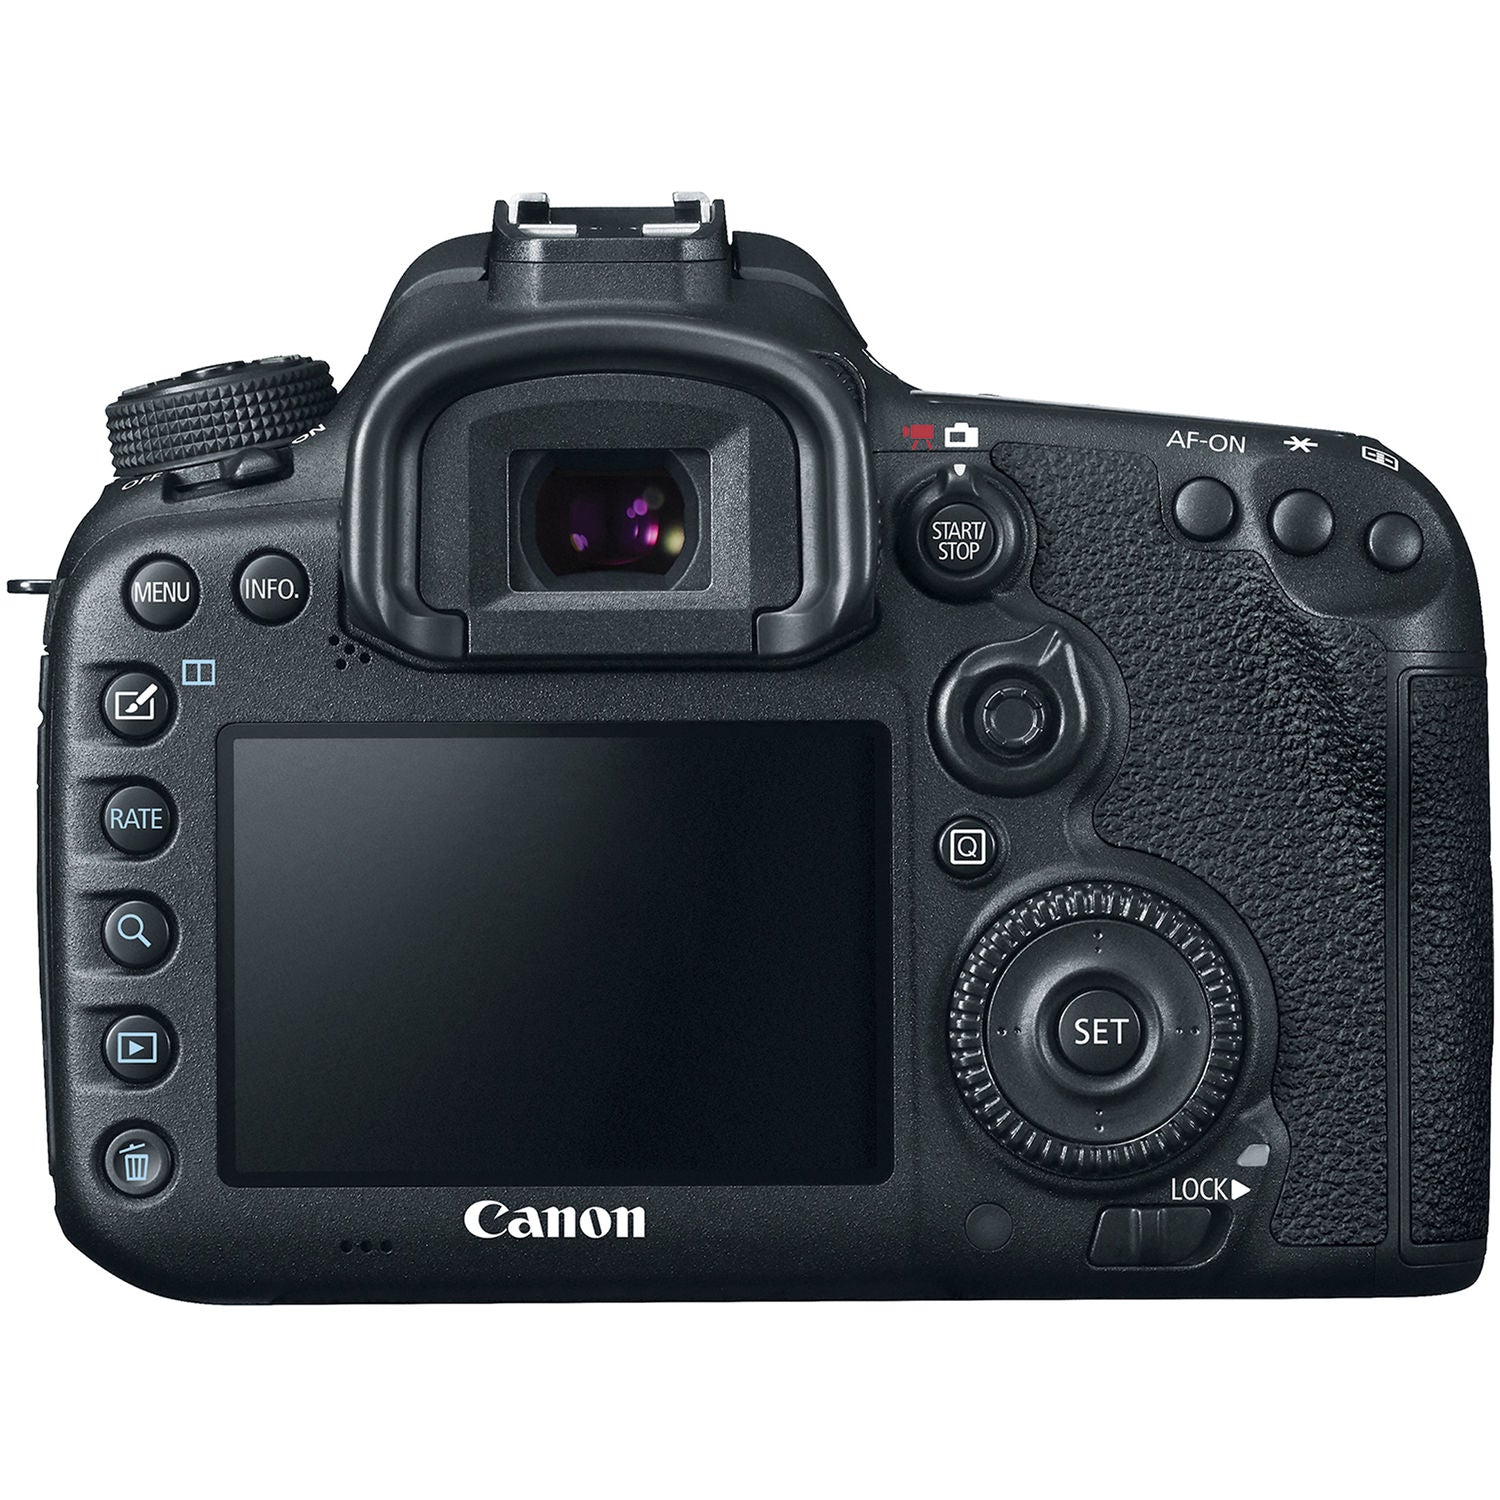 Canon EOS 7D Mark II DSLR Camera (Intl Model) with 18-135mm Lens & W-E1 Wi-Fi Adapter With Cleaning Kit and Extended Warranty